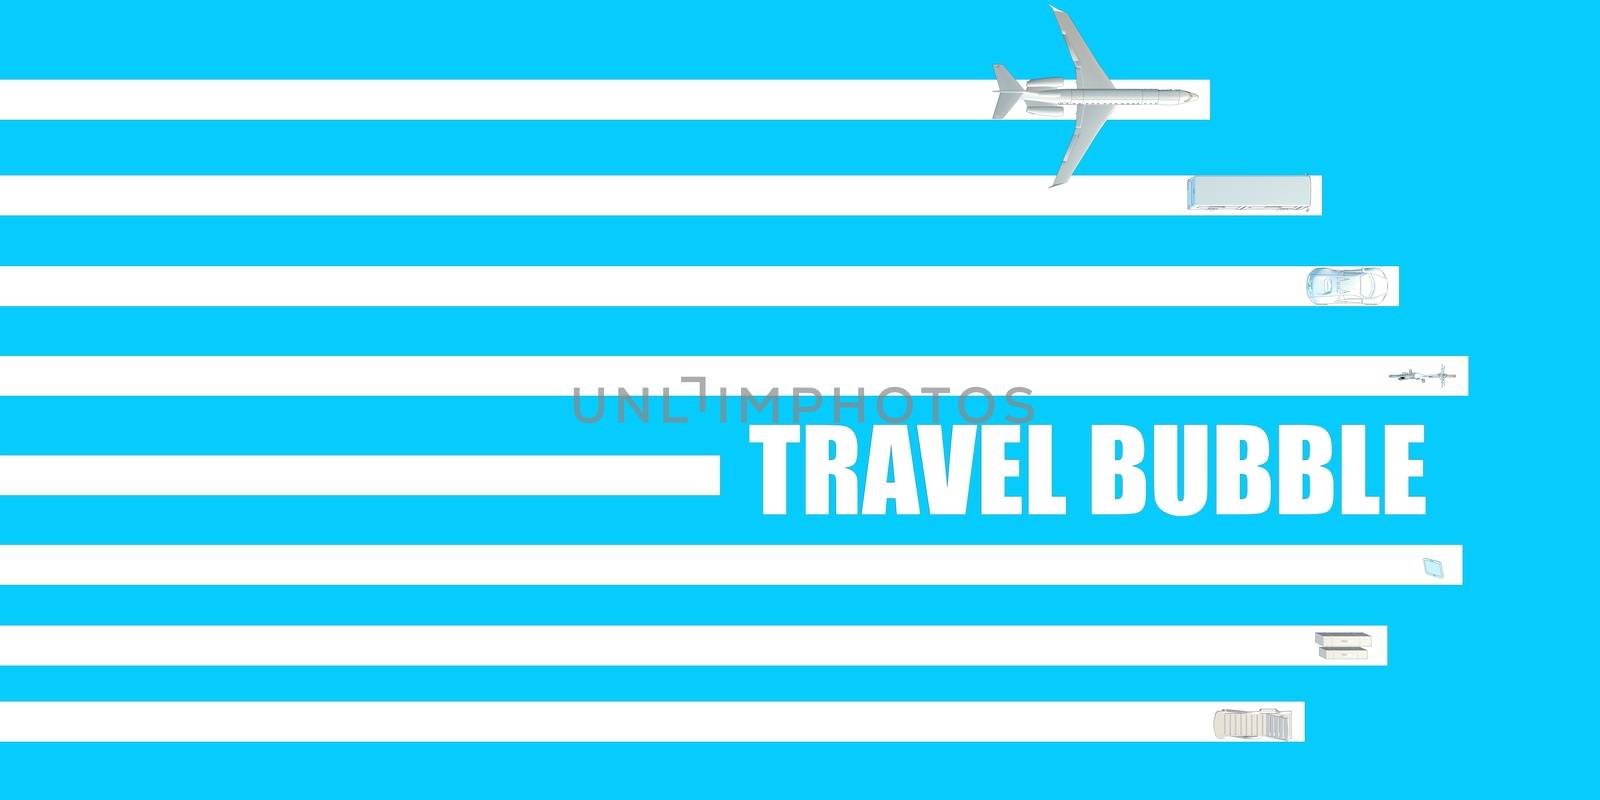 Travel Bubble for Information Update as a Traveler Concept